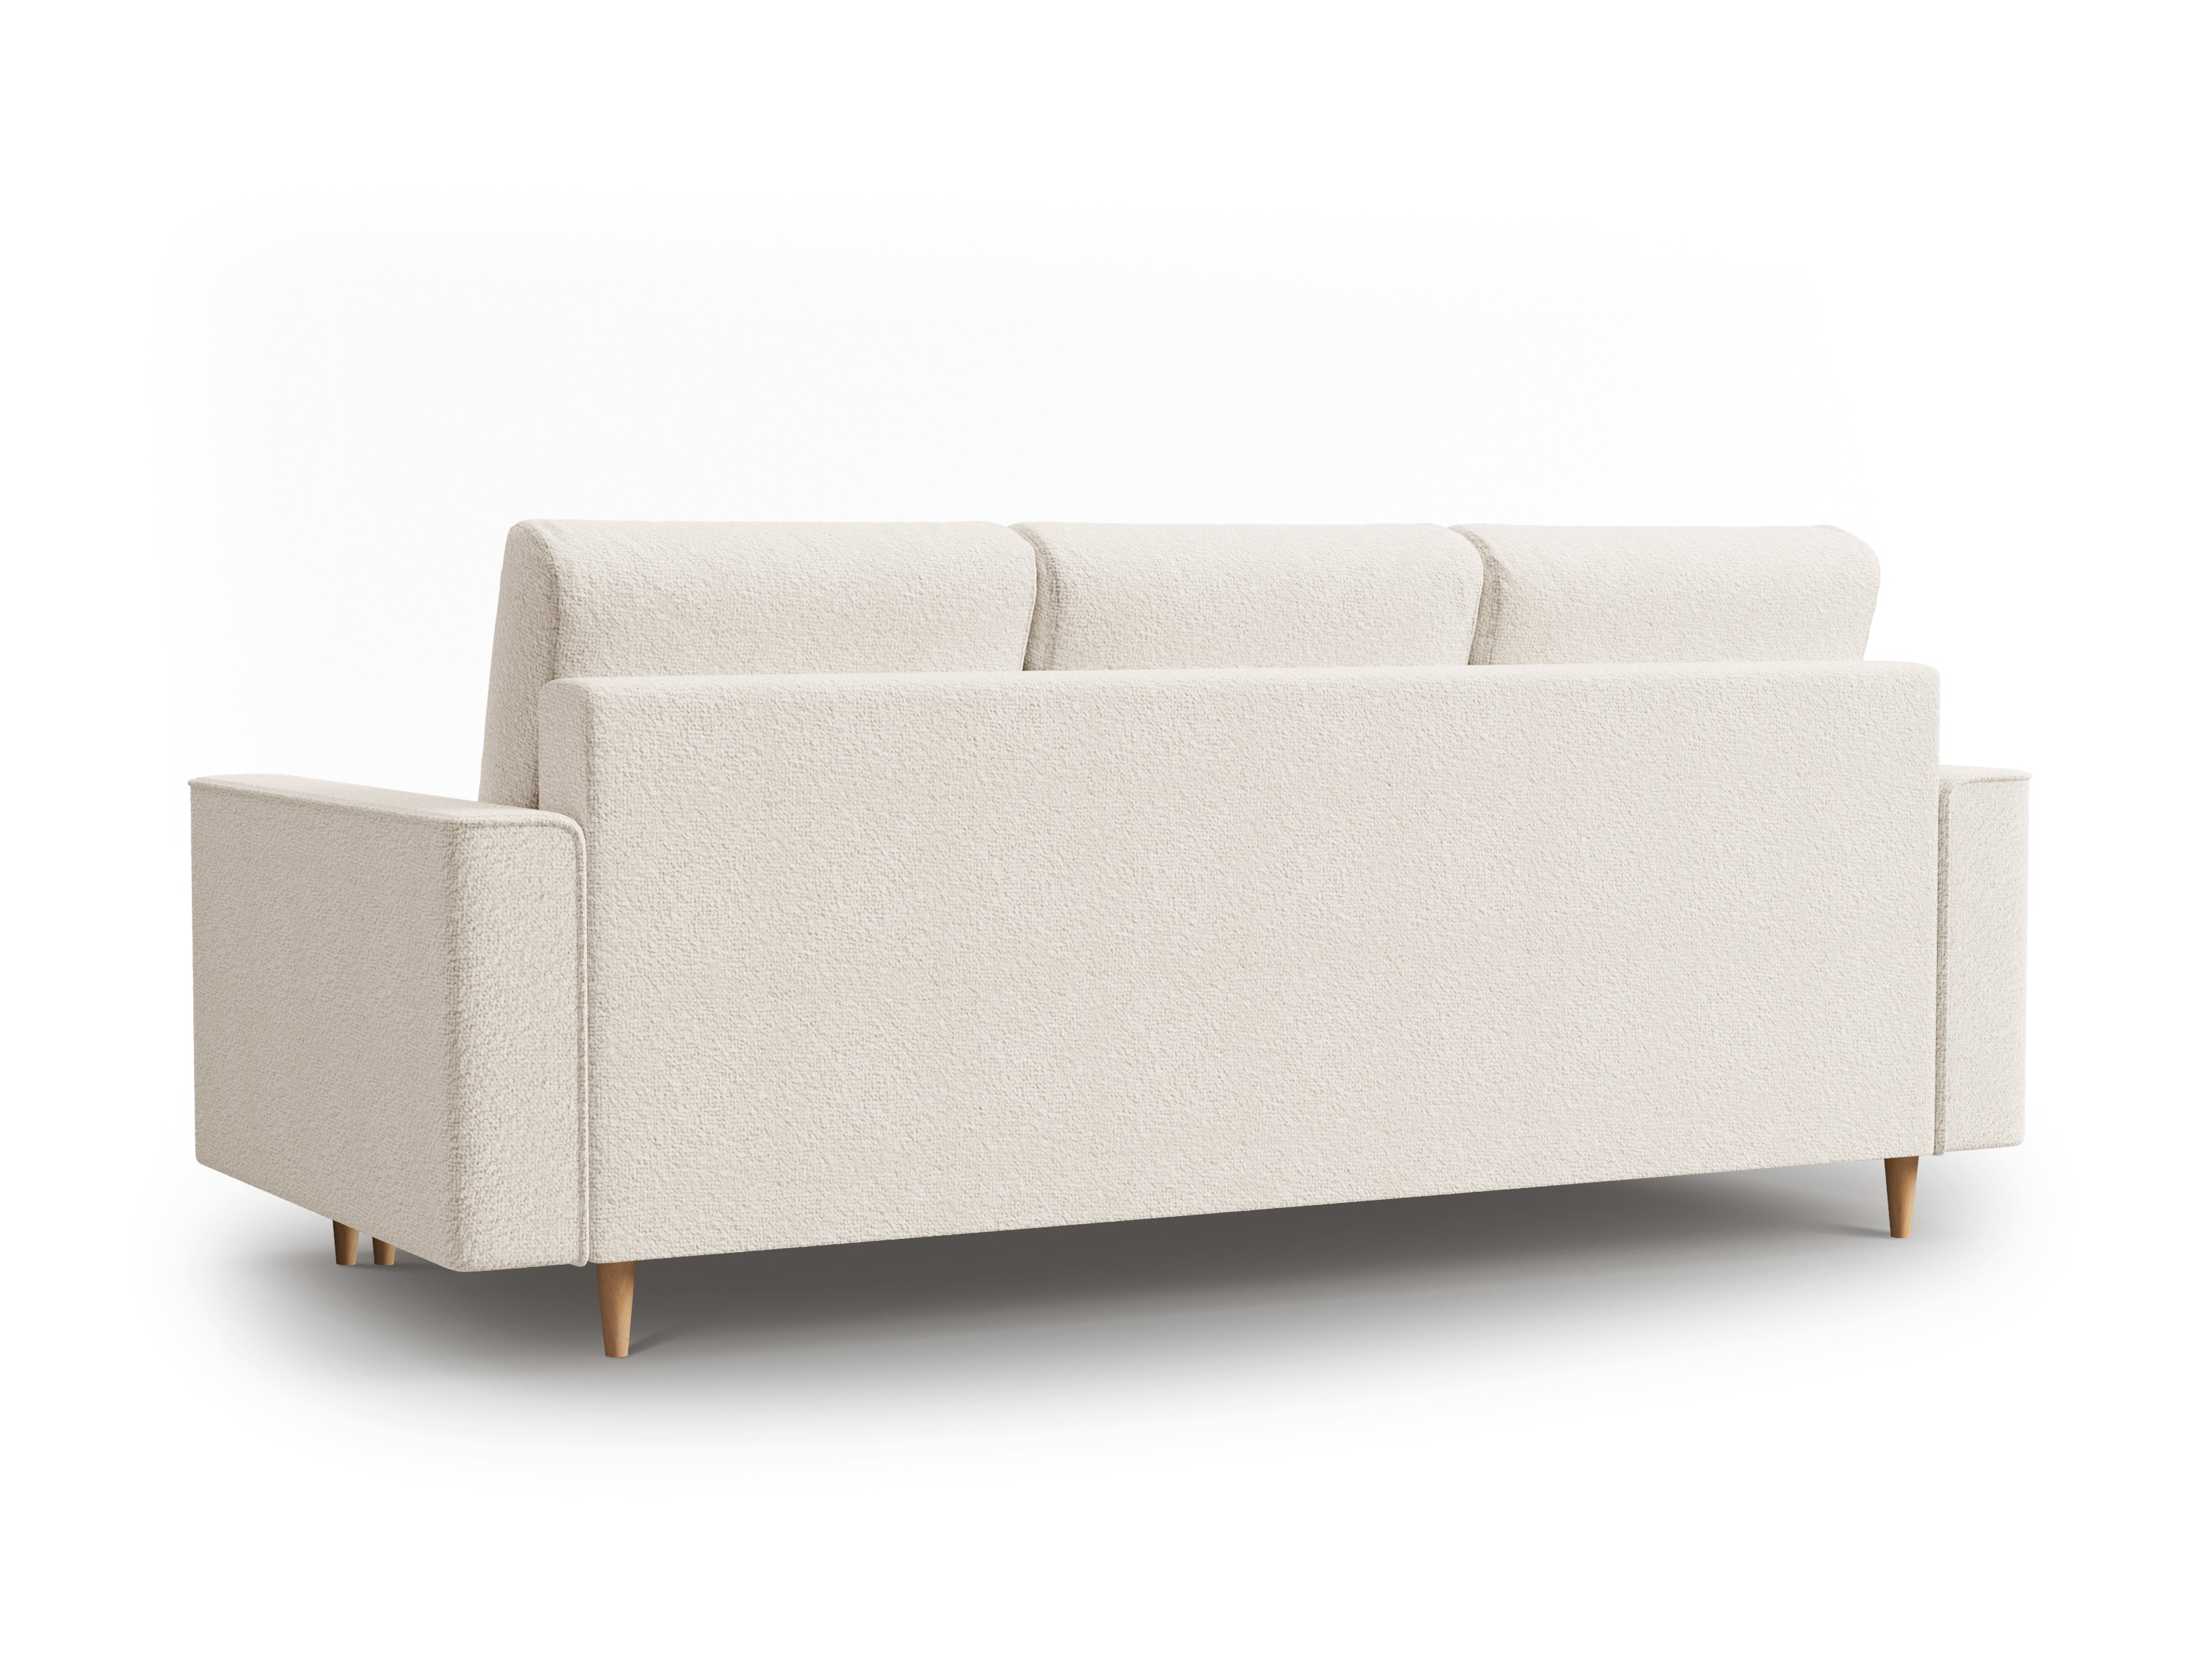 Boucle Sofa With Bed Function And Box, "Cartadera", 3 Seats, 222x100x92
Made in Europe, Mazzini Sofas, Eye on Design